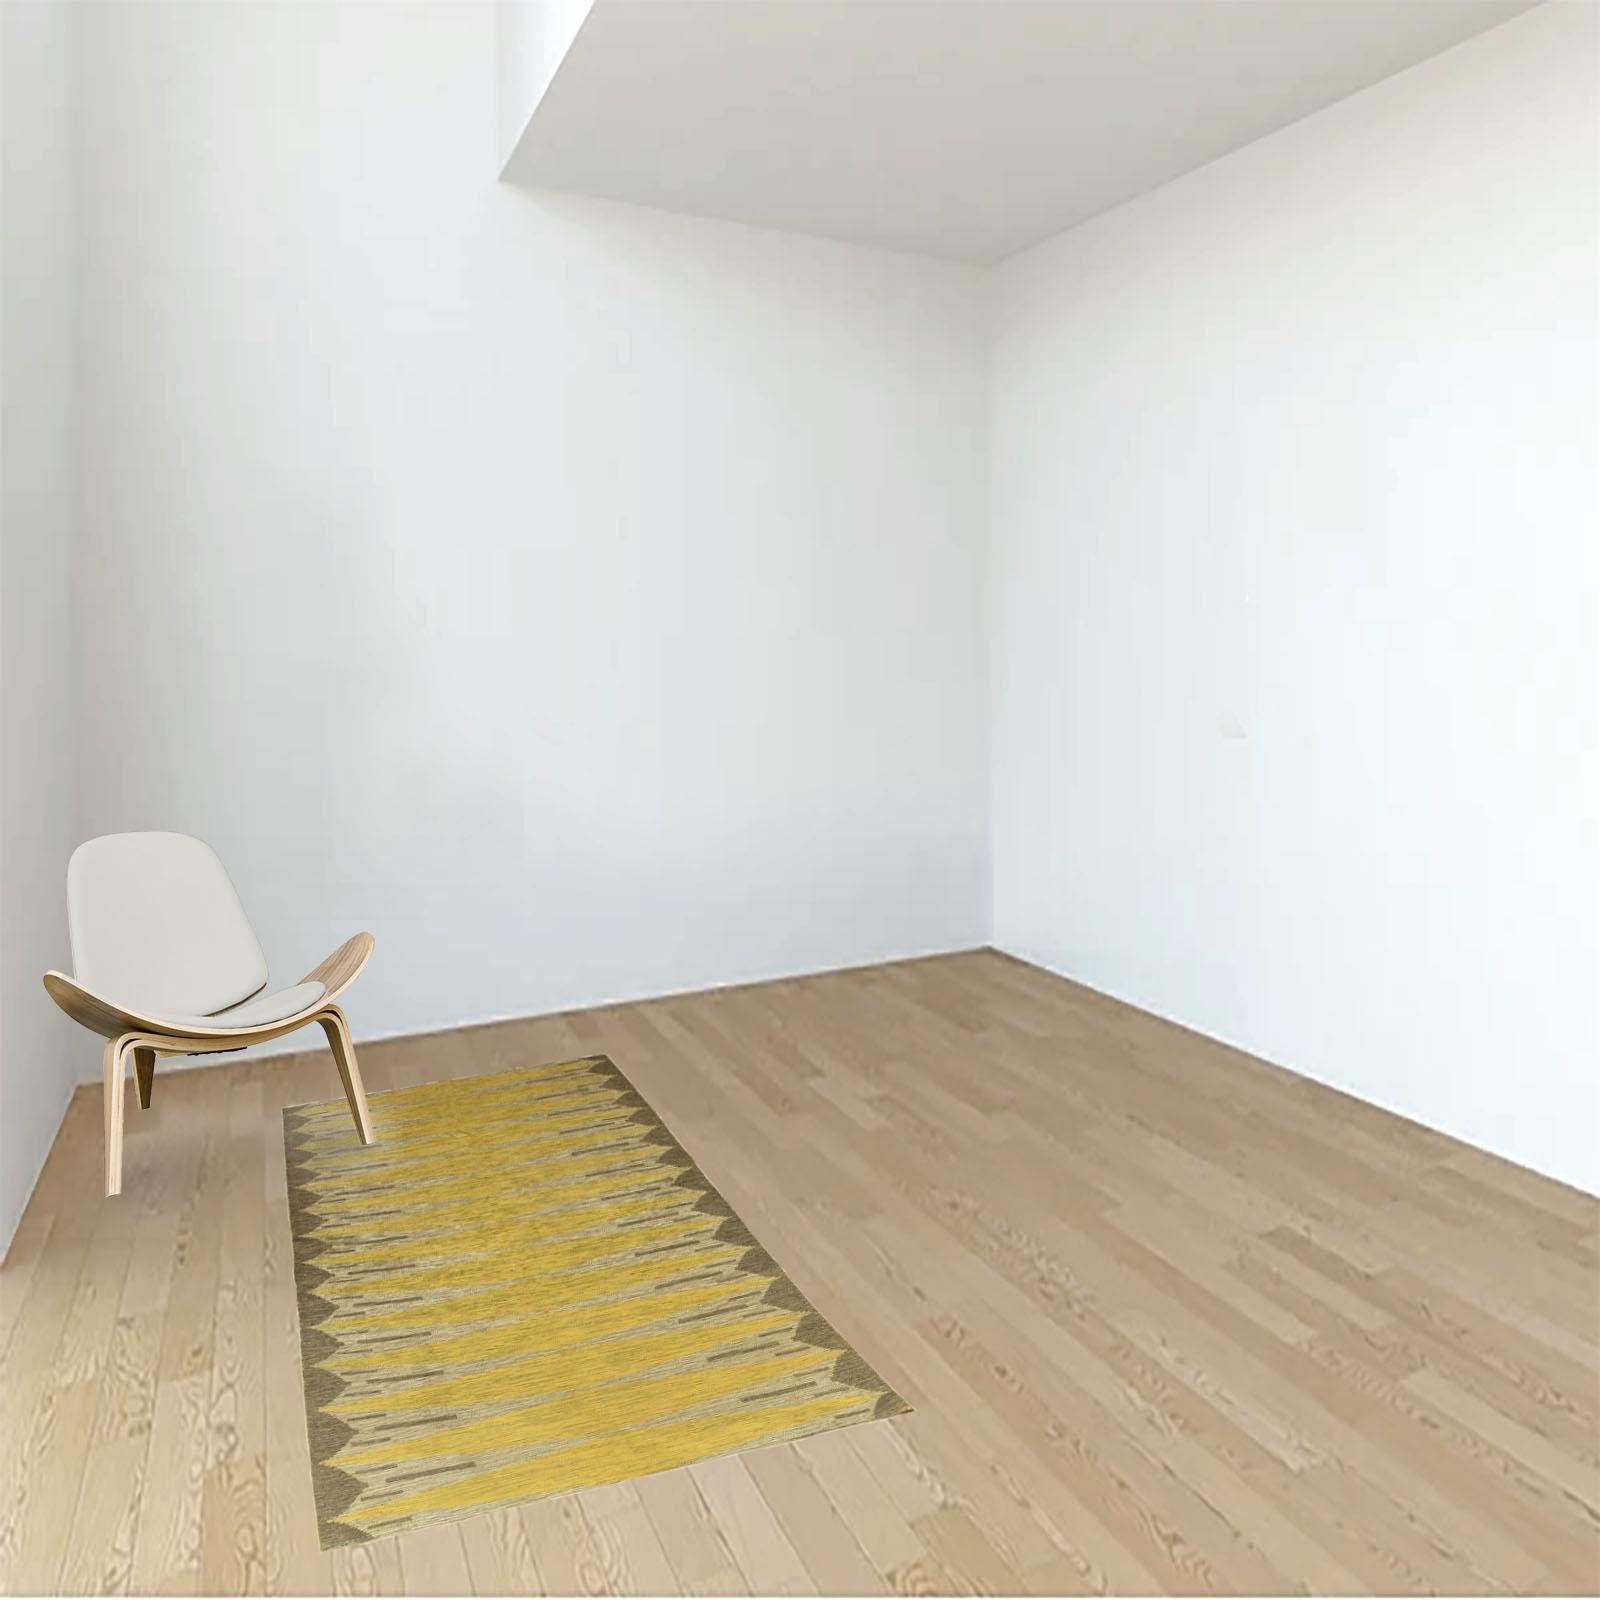 Mid-Century Swedish flat-weave rug designed by Ingrid Dessau. Double weaved - this reversible carpet can be used on both sides. Geometric design in shades of marled gray yarns, mustard yellow and light brown on ends.
Dimensions: 126x193 cm
In very